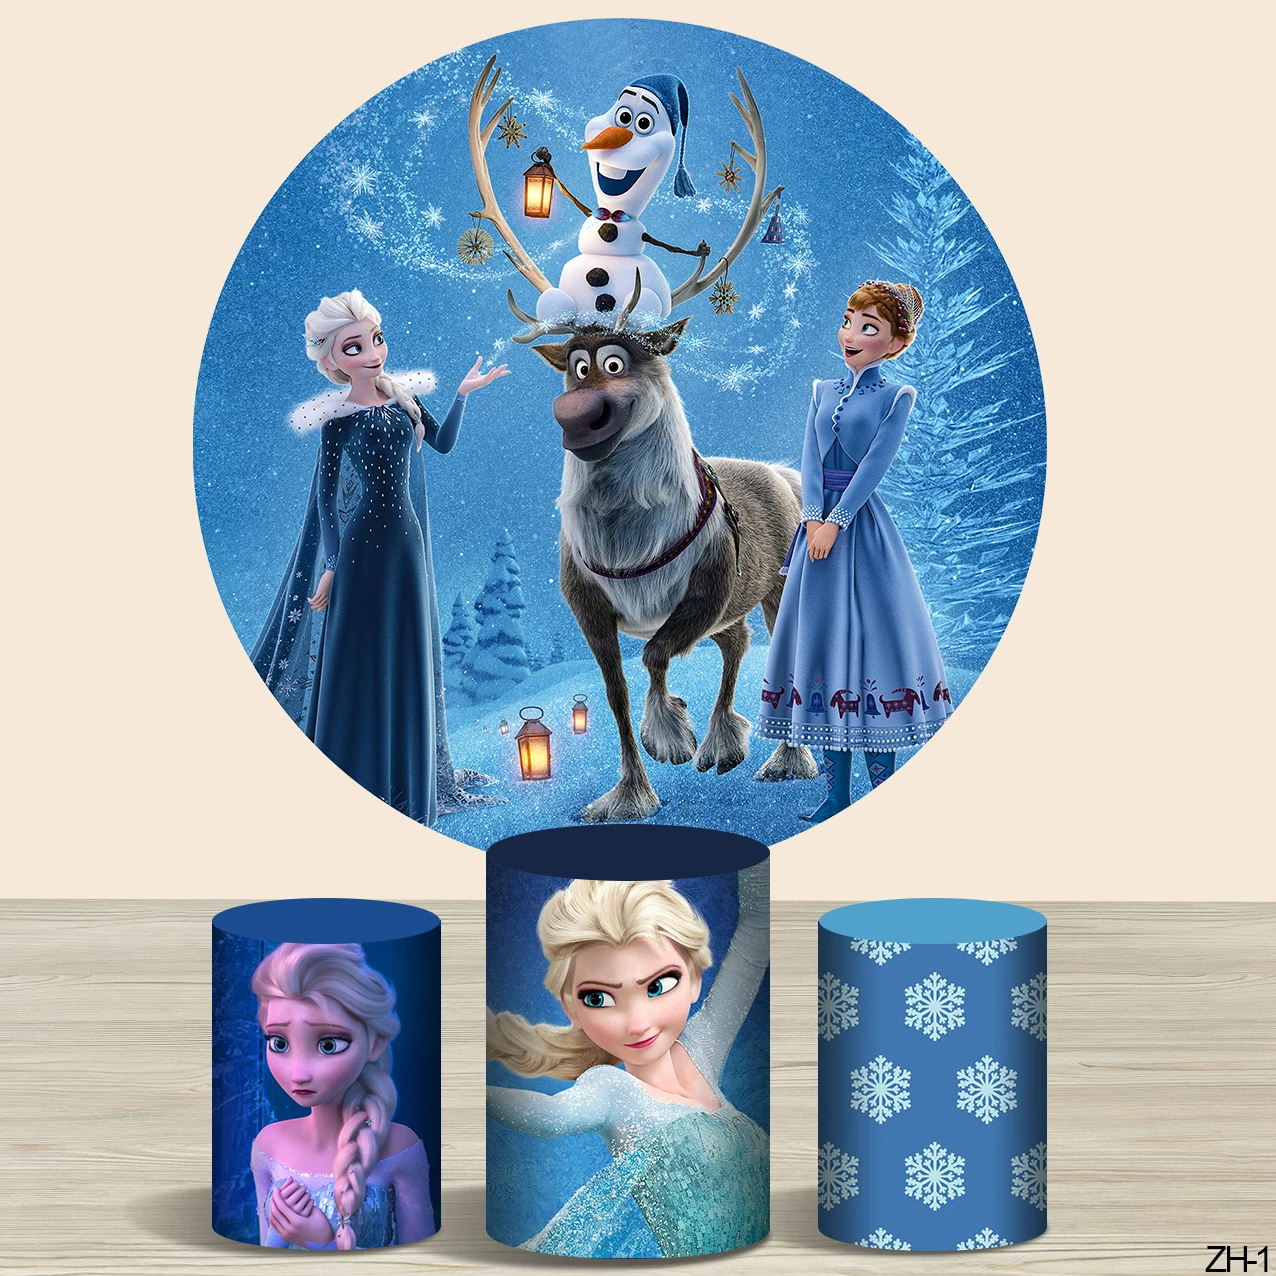 

Disney Frozen Elsa Anna Round Circle Backdrops Girls Birthday Party Cylinder Backgrounds Snowflake Snow Ice Plinth Covers